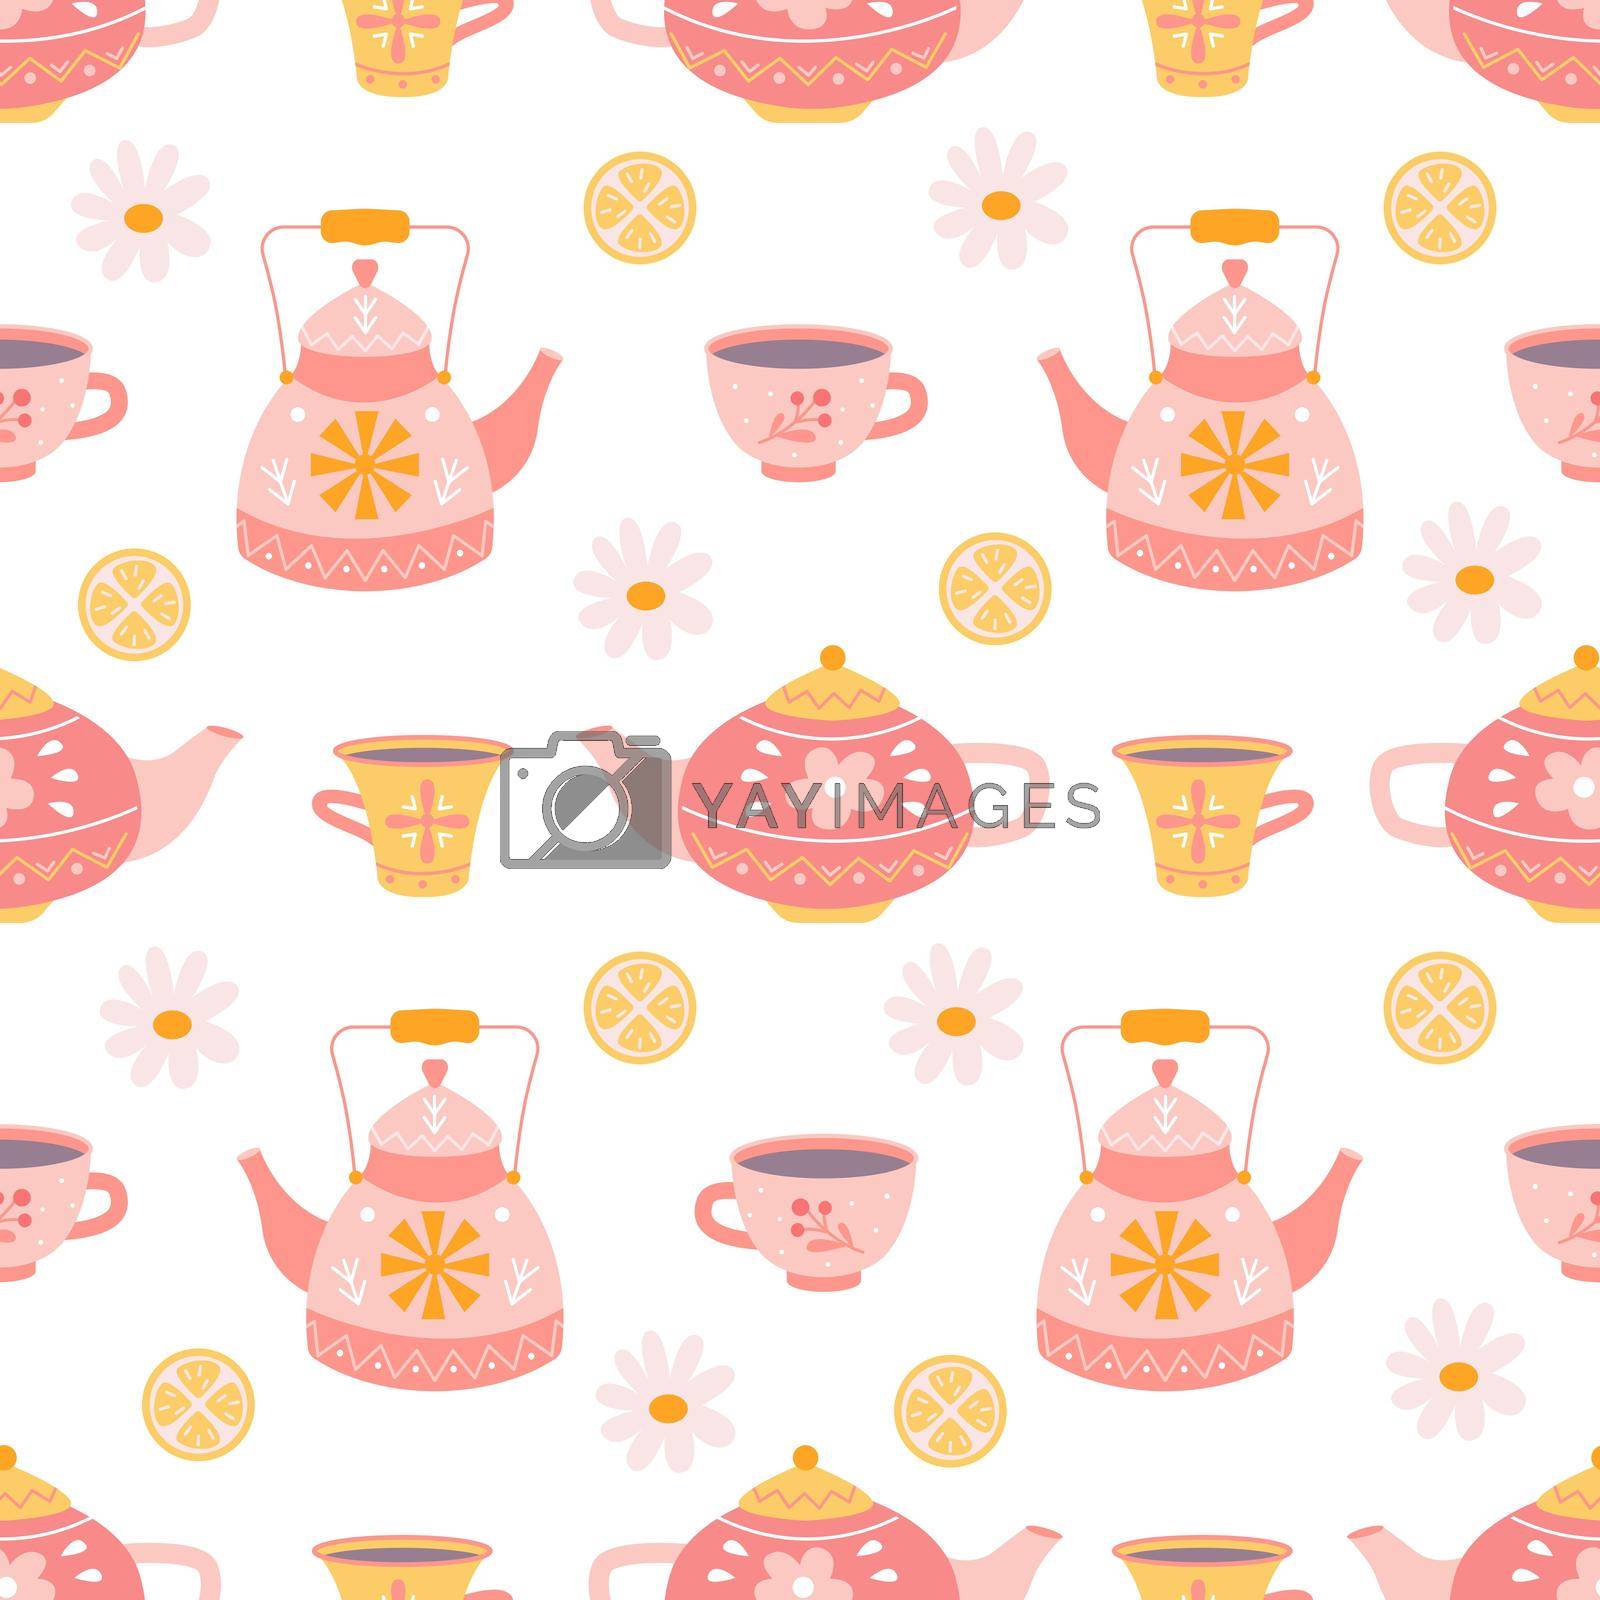 Royalty free image of Teapots and mugs with tea, daisies and lemon on white background, vector seamless pattern in flat hand drawn style by vetriciya_art